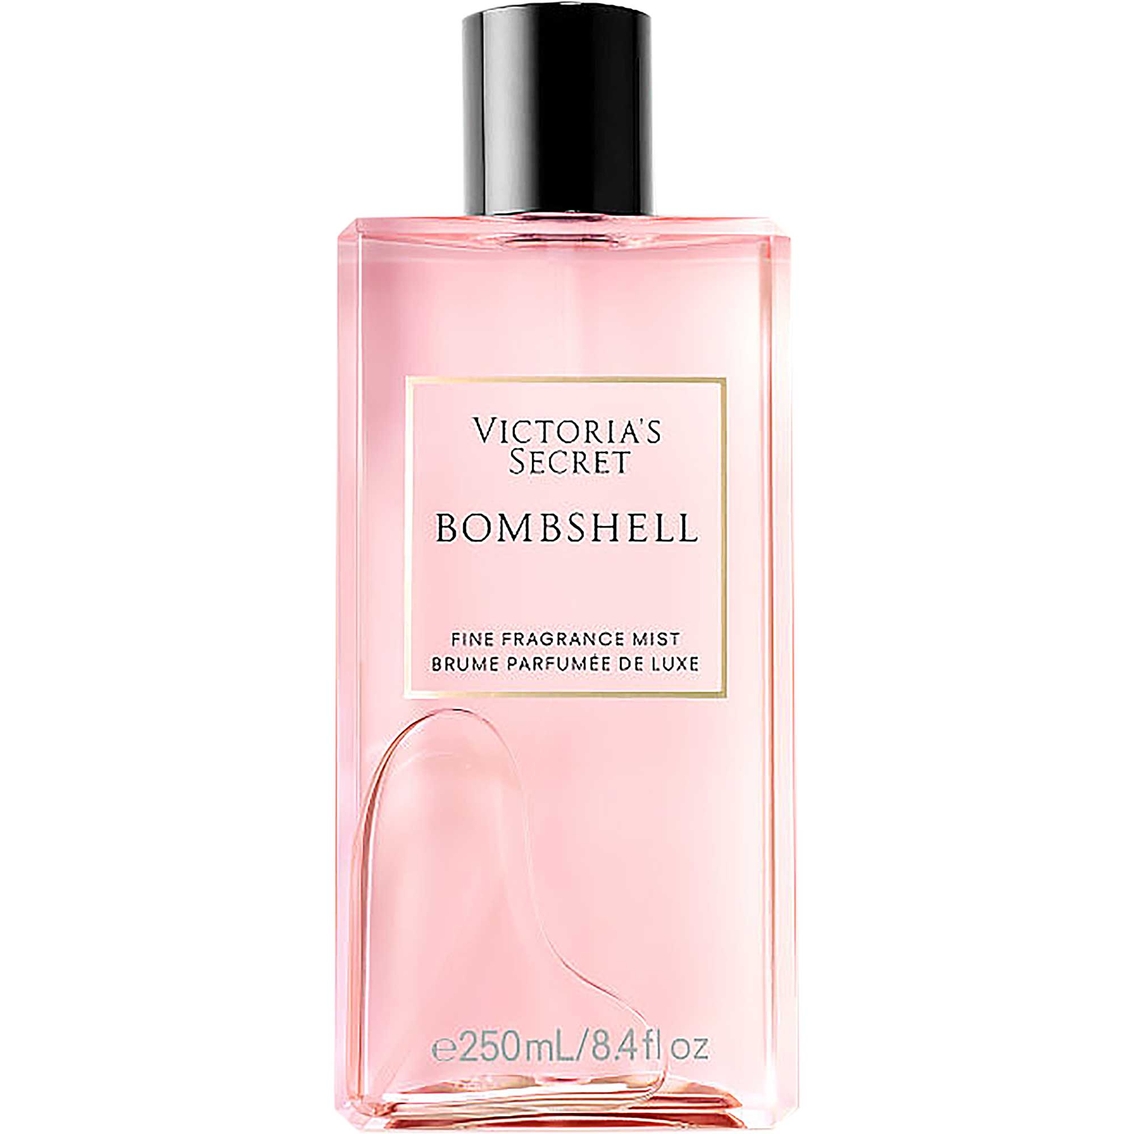 Victorias Secret Bombshell Perfume Review: The Ultimate Fragrance Guide